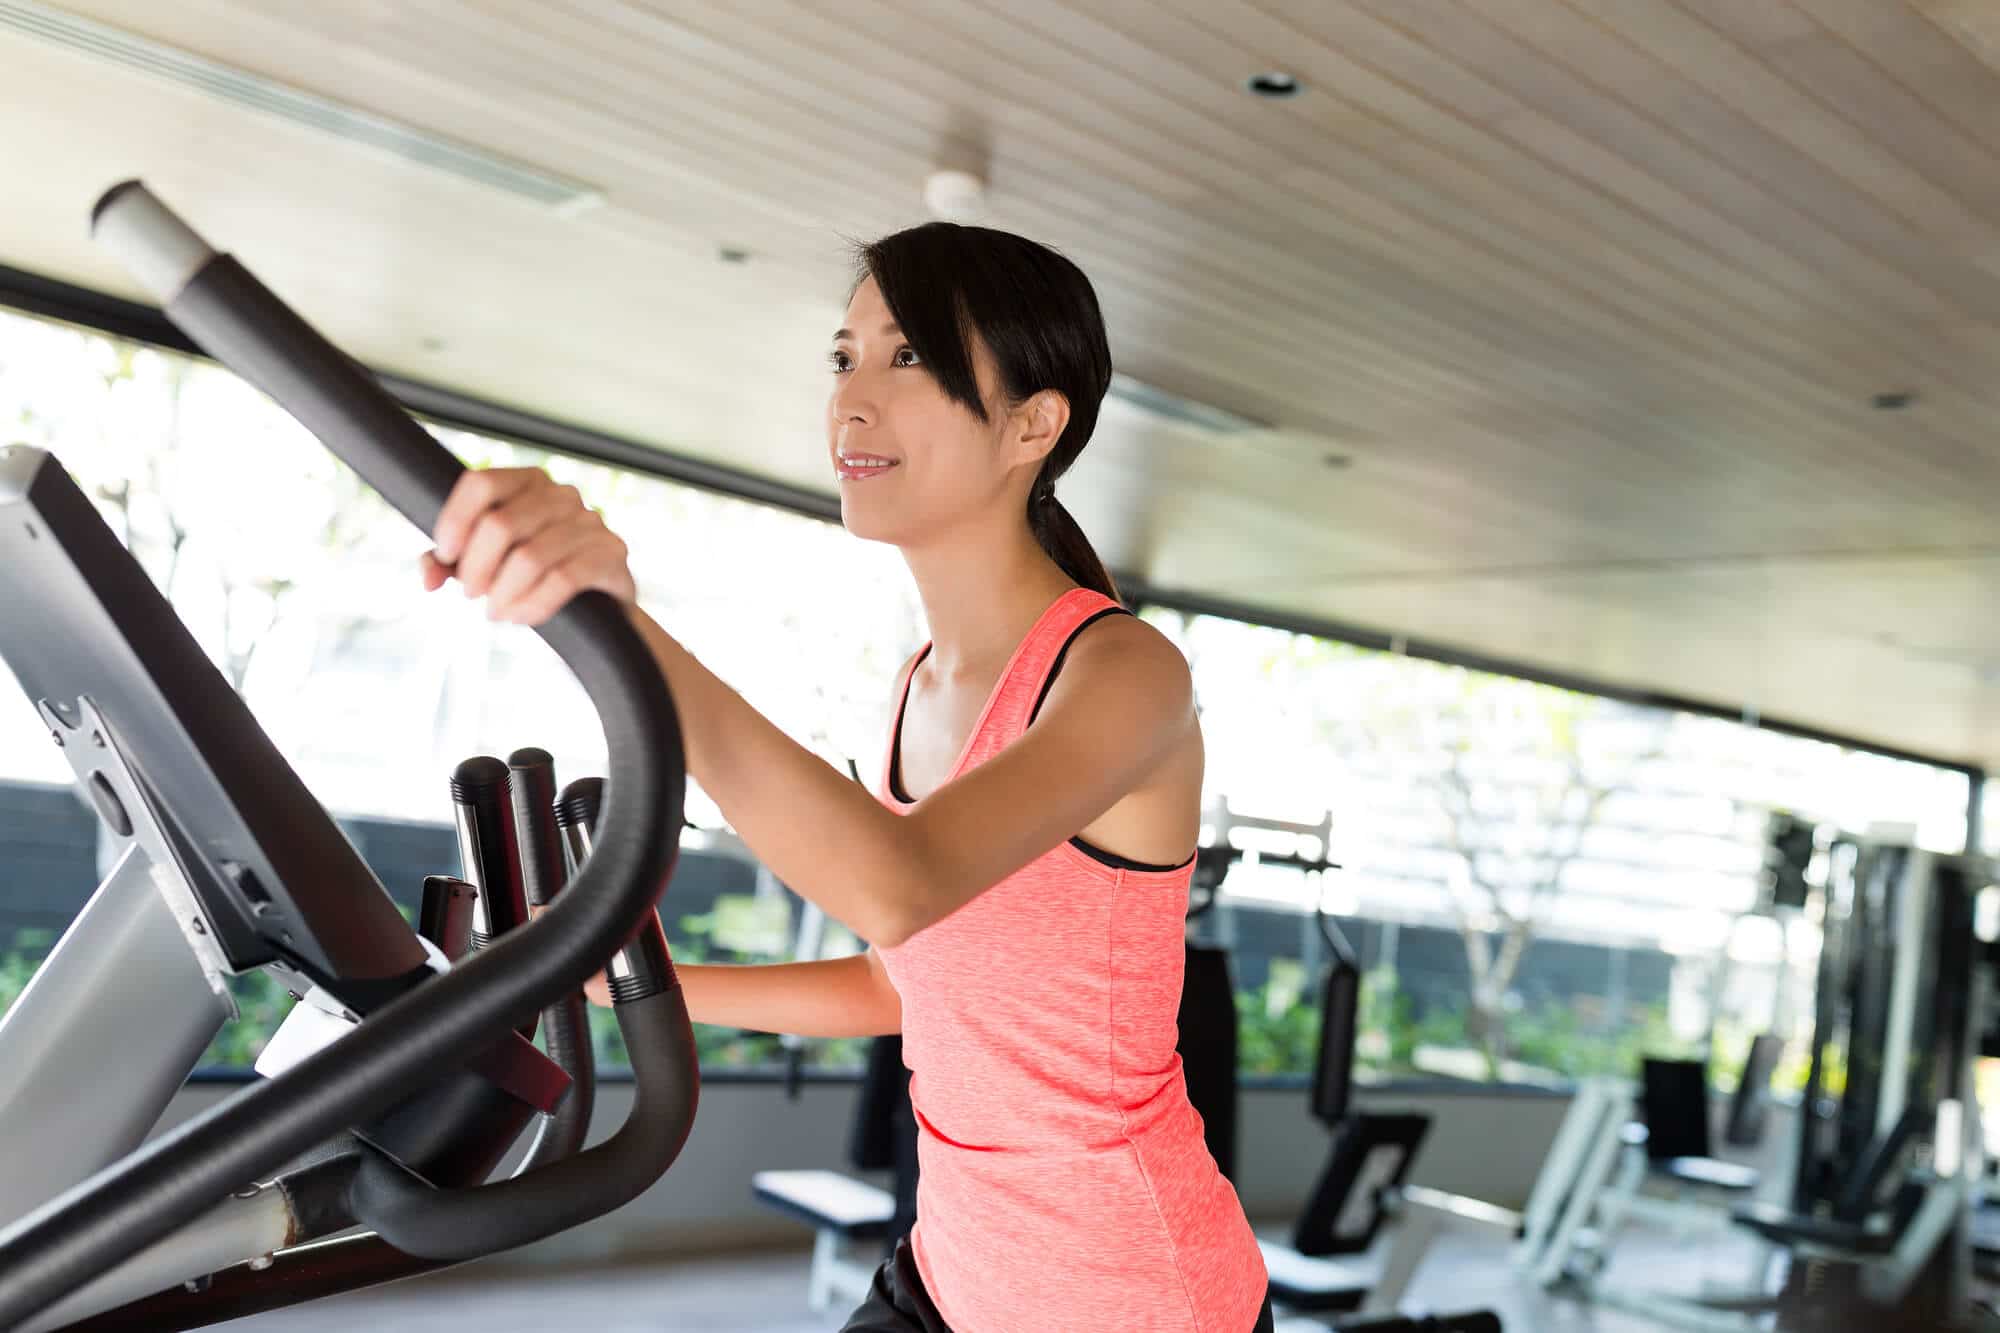 elliptical for toning stomach - Fitness Expo